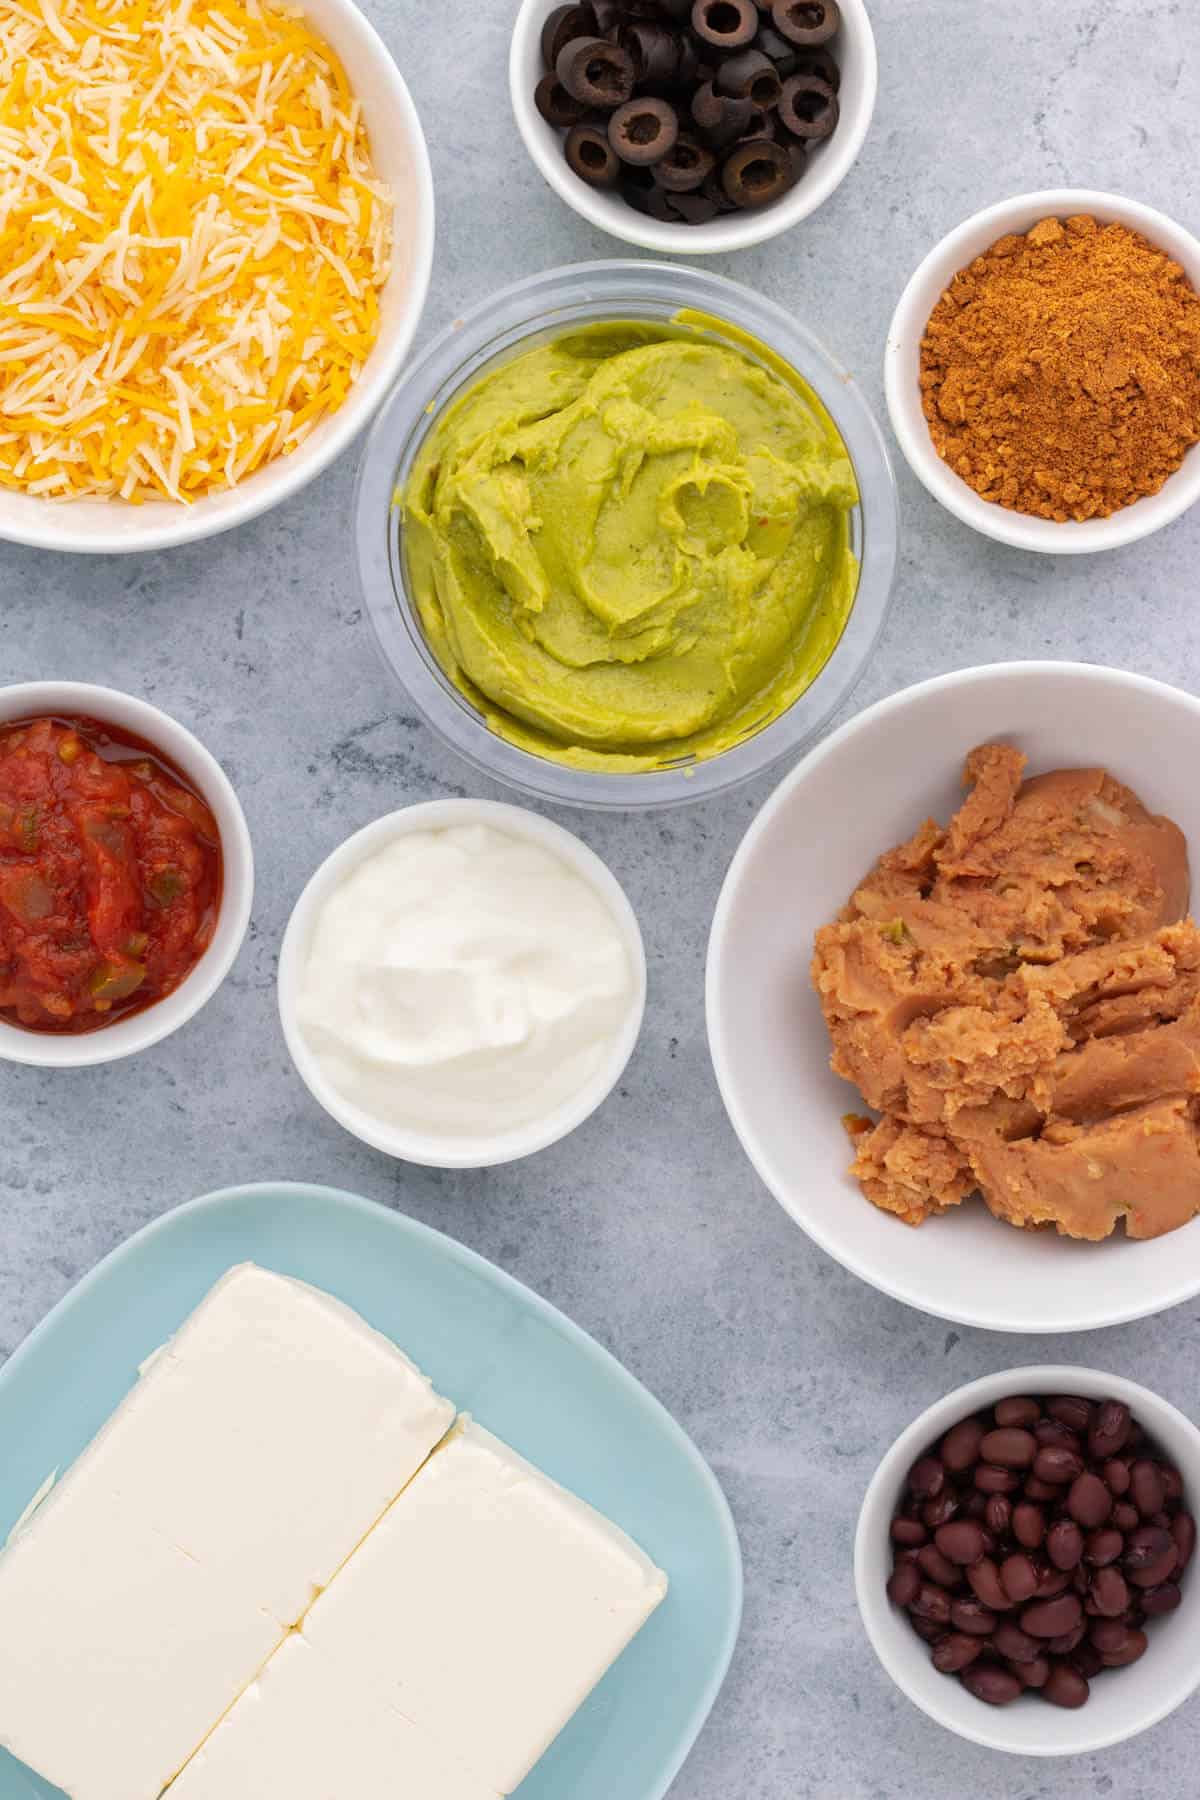 Ingredients used in making Tex-Mex style layered Spider Web Dip.